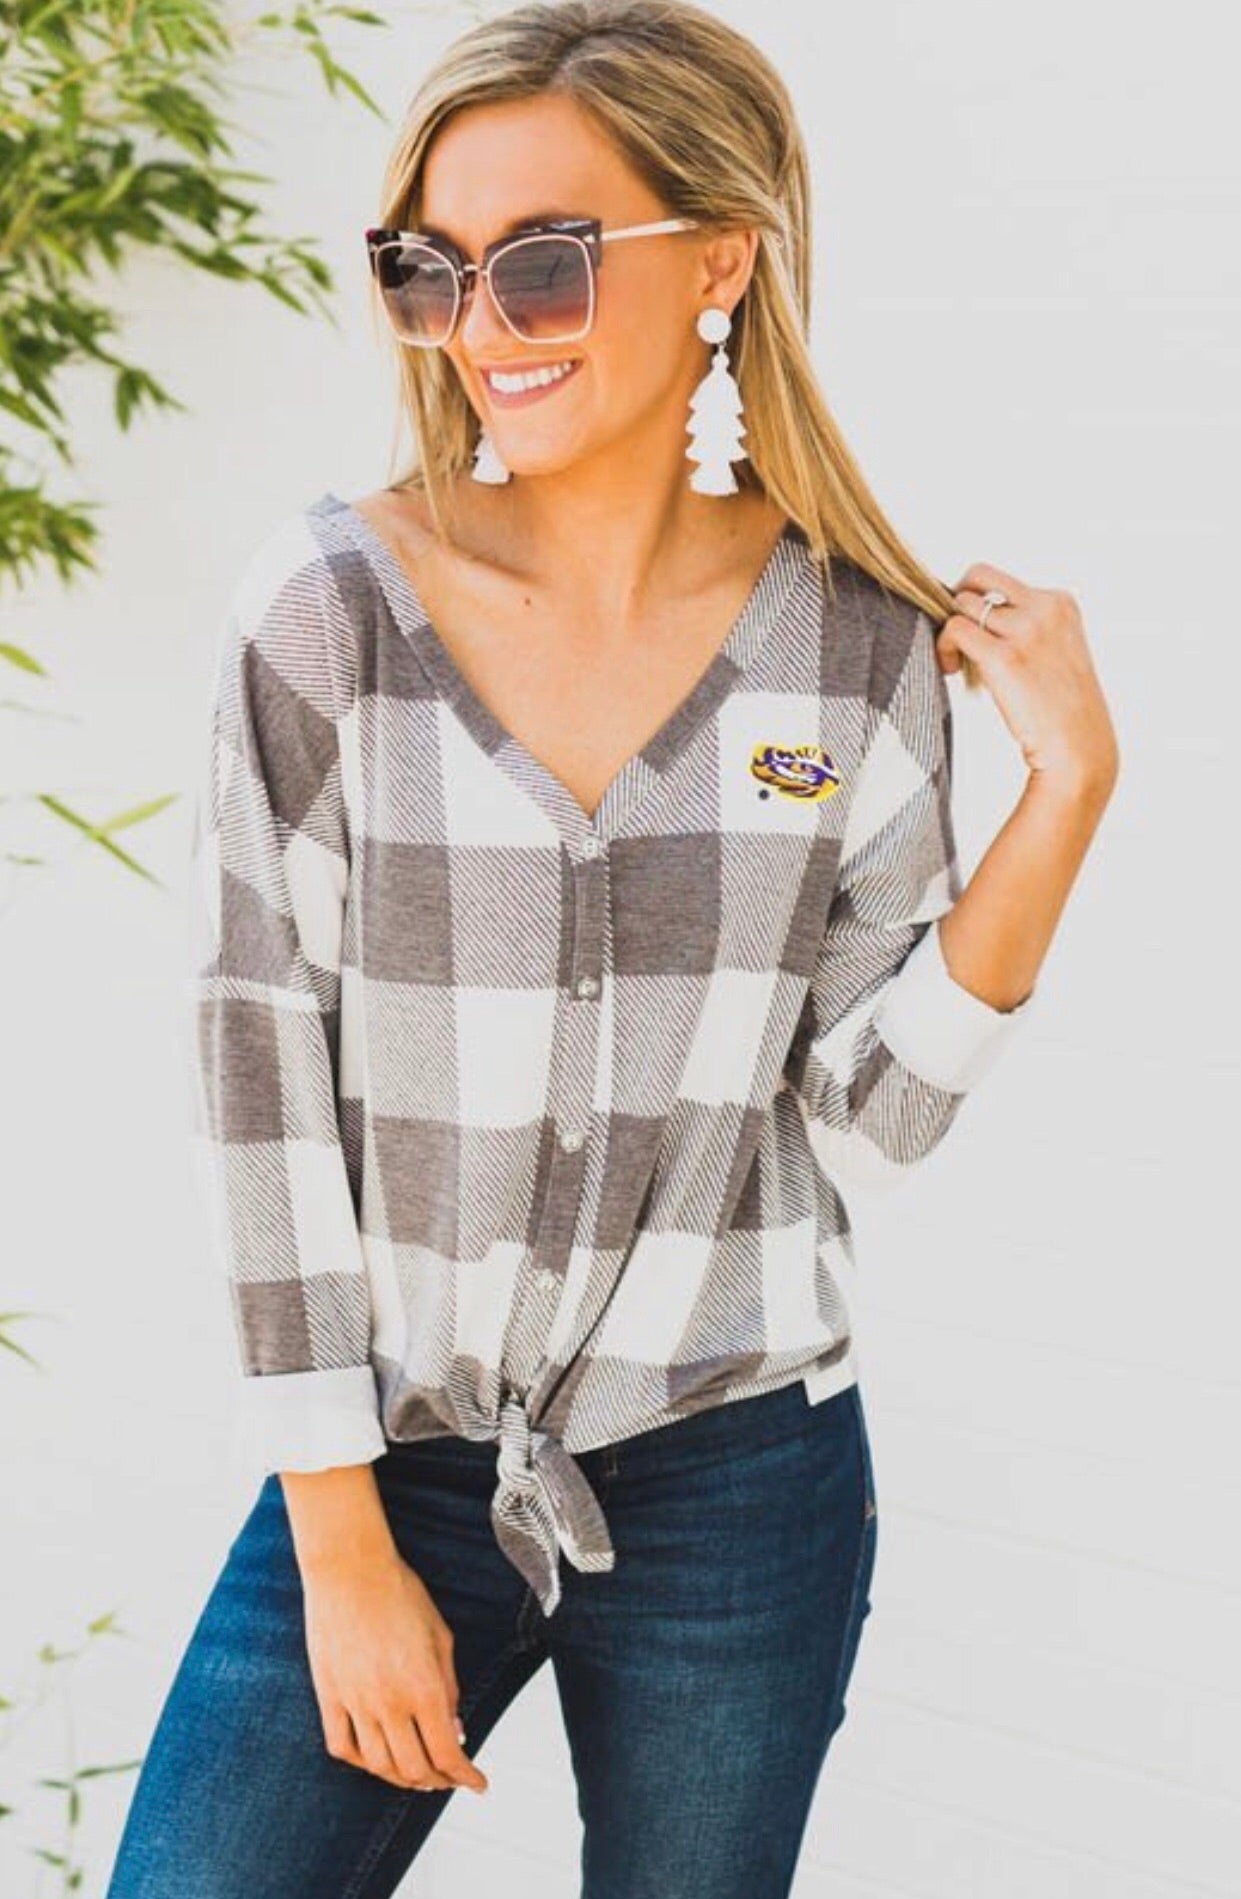 LSU Tigers "Check Your Facts" Top